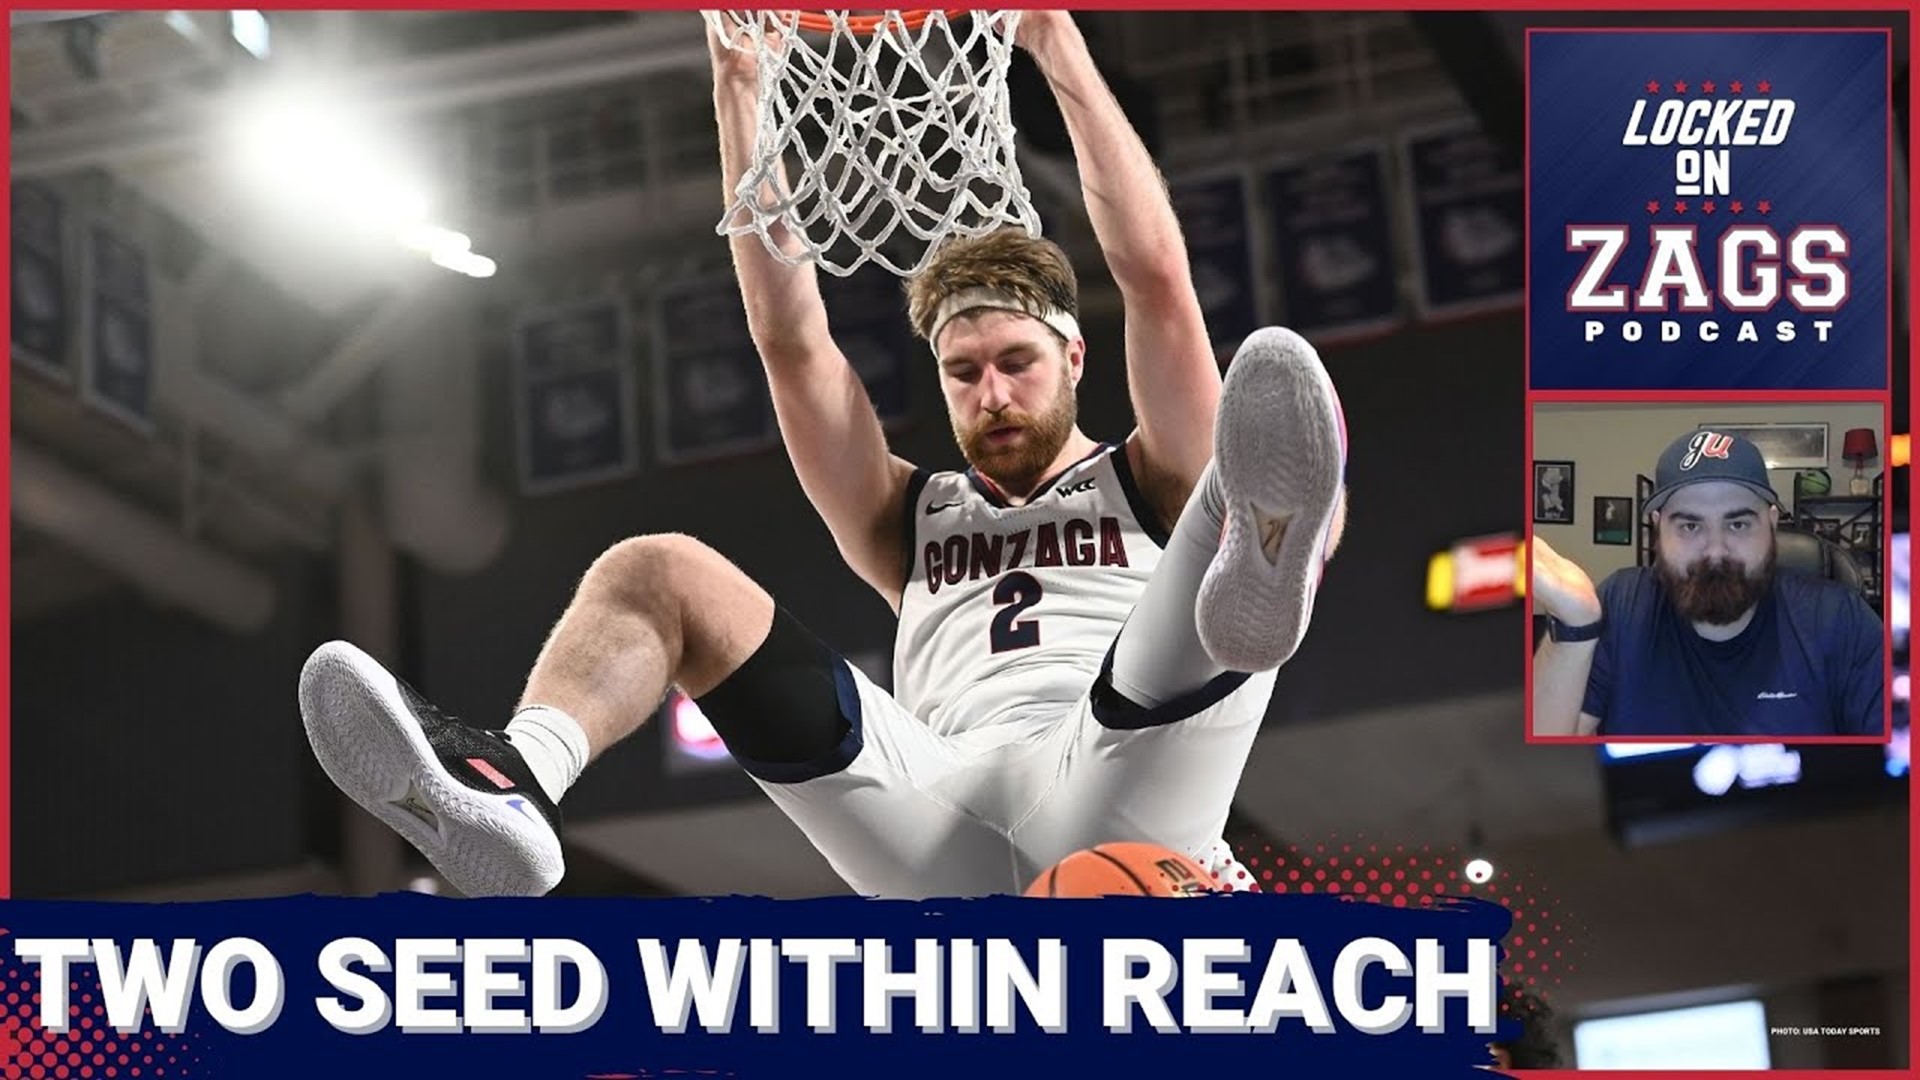 The path to a two seed is absolutely there for Gonzaga  - especially if Arizona falters in the Pac-12 Tournament or the Baylor Bears in the Big-12.